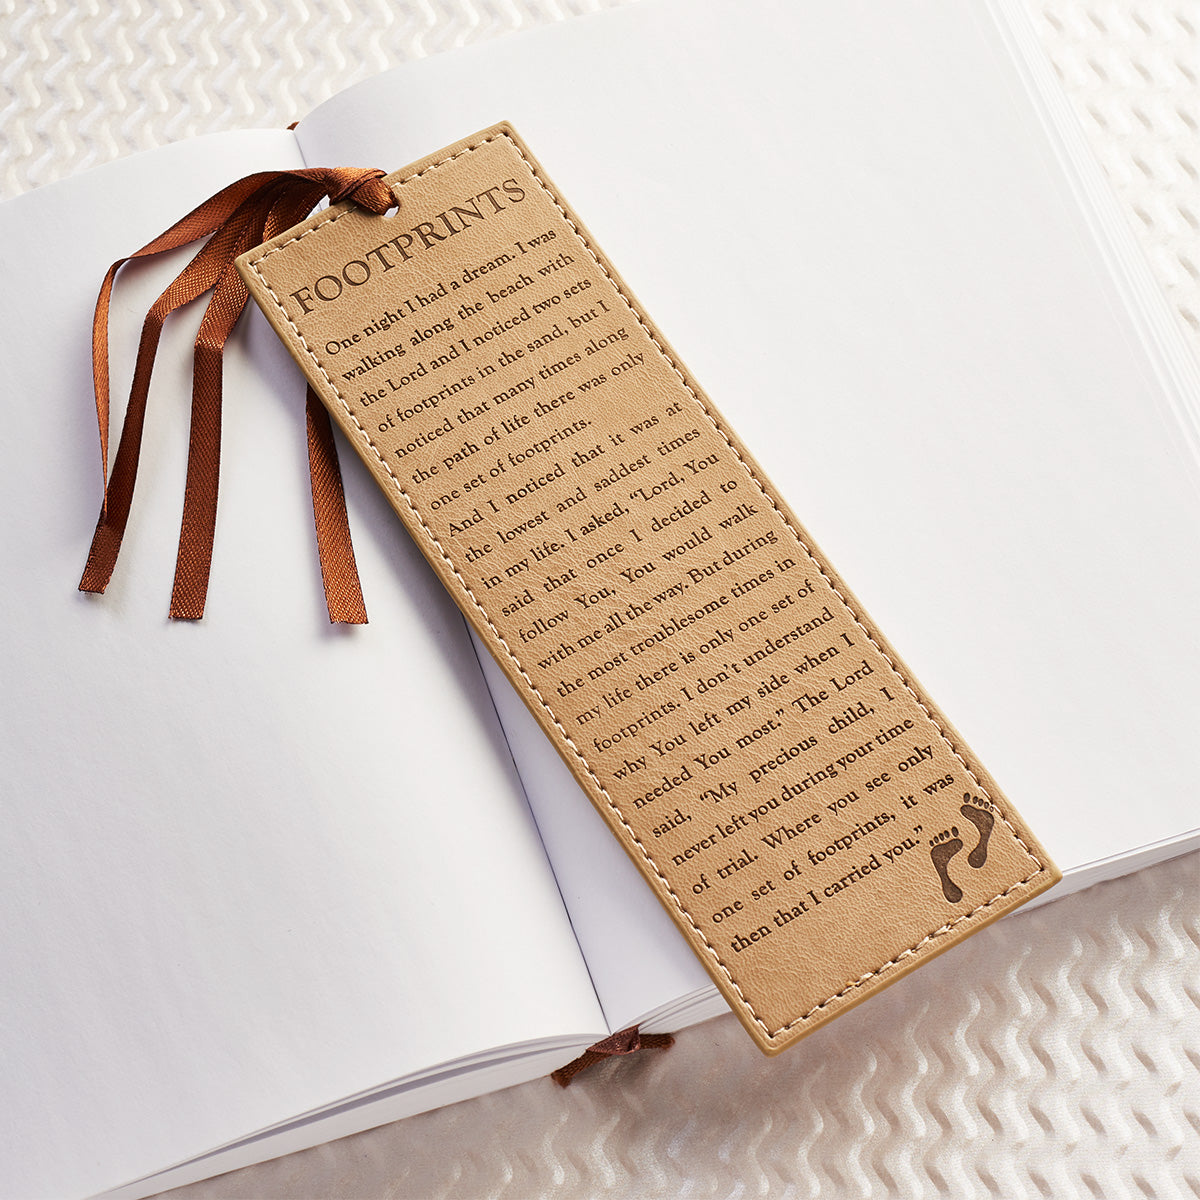 Image of Footprints - Faux Leather Bookmark other